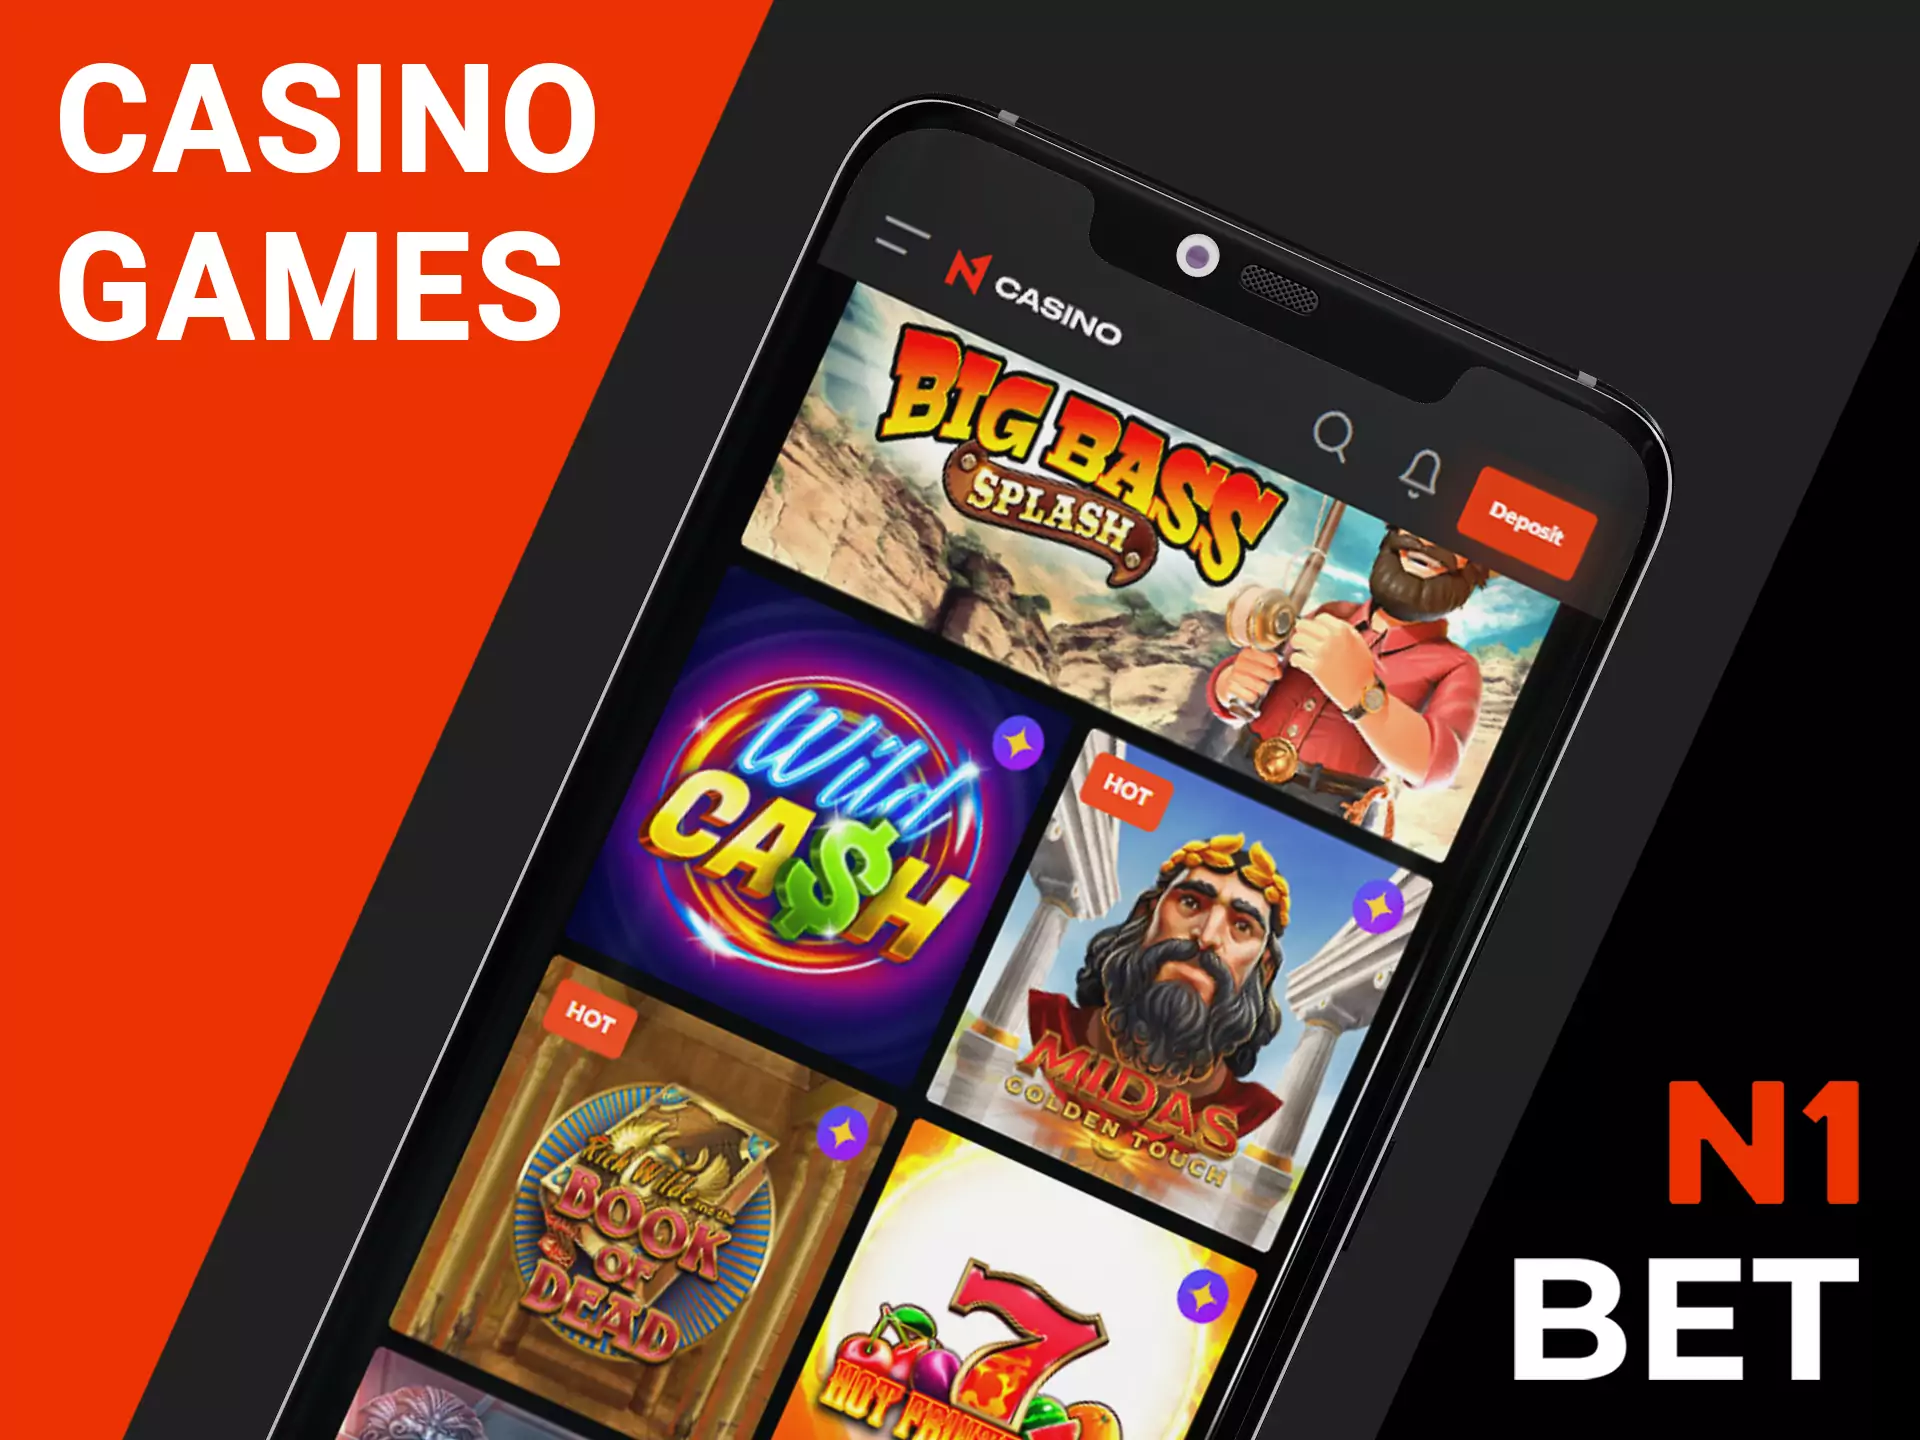 Play different casino games using N1Bet app.